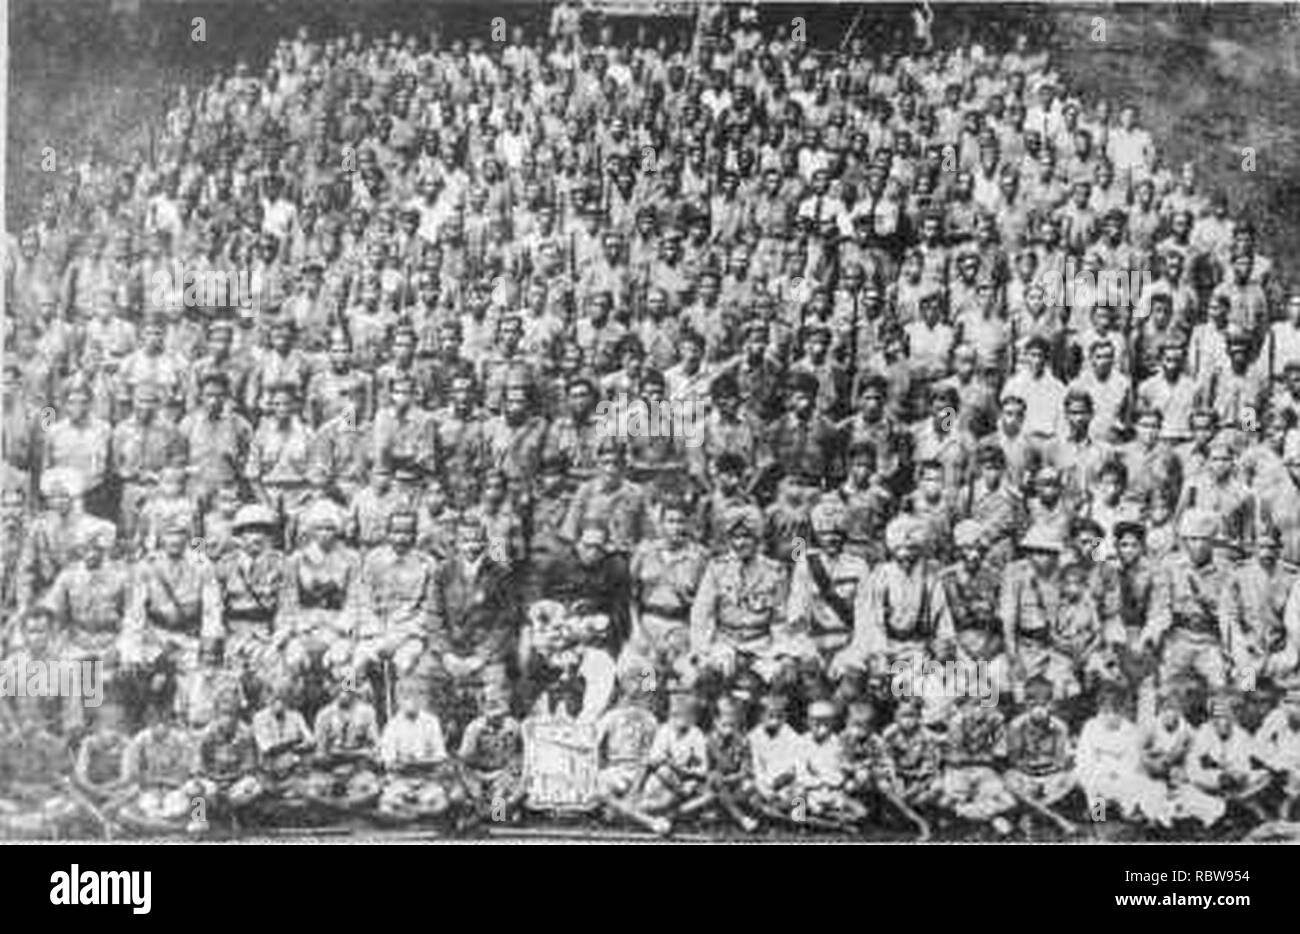 A group photograph of the soldiers of the 'Samata Sainik Dal' (Social Equality Army). Dr. Babasaheb Ambedkar seen the middle of second line. Stock Photo